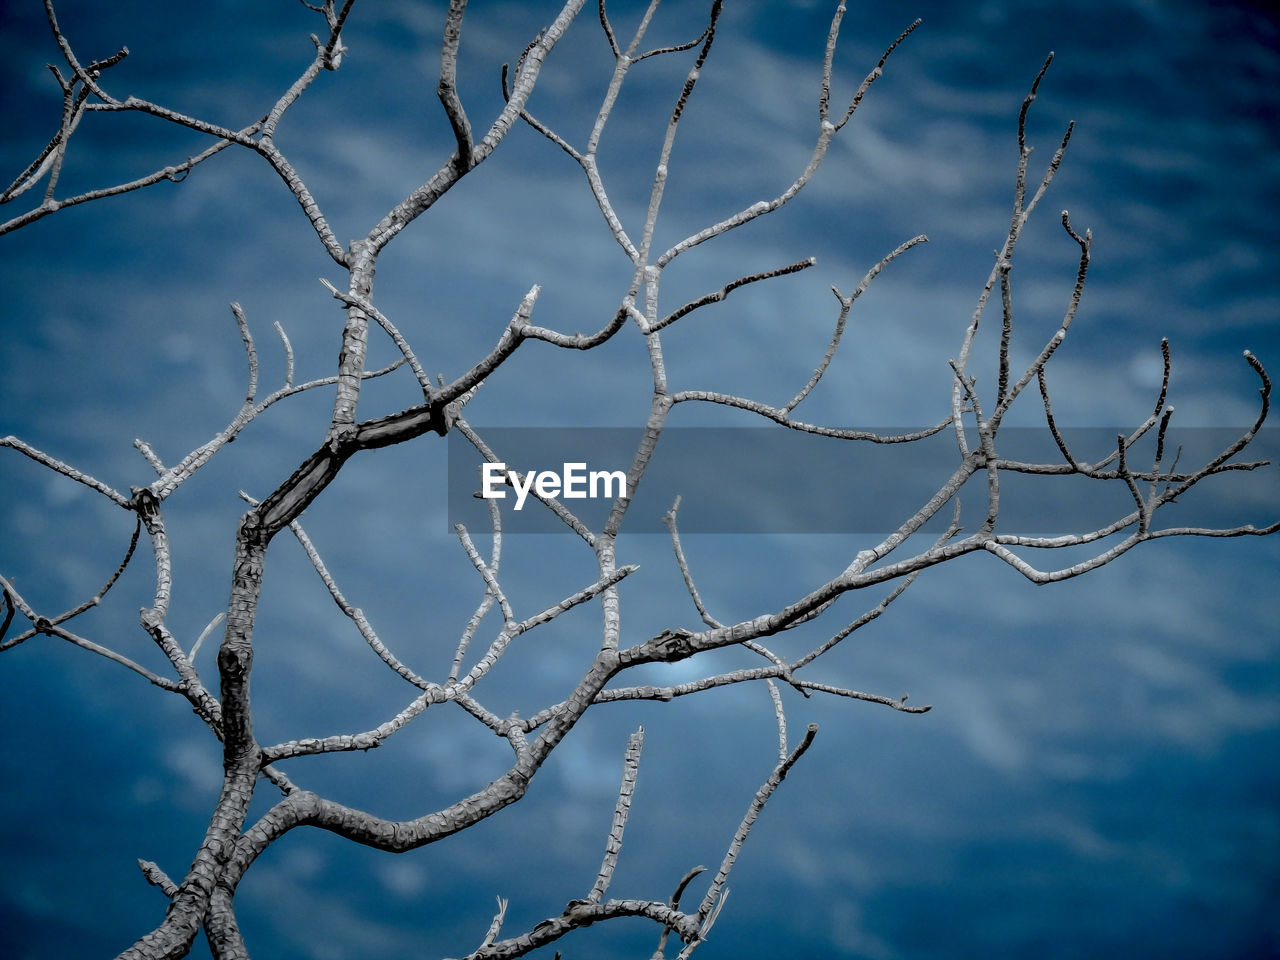 CLOSE-UP OF BARE TREE AGAINST BLUE SKY